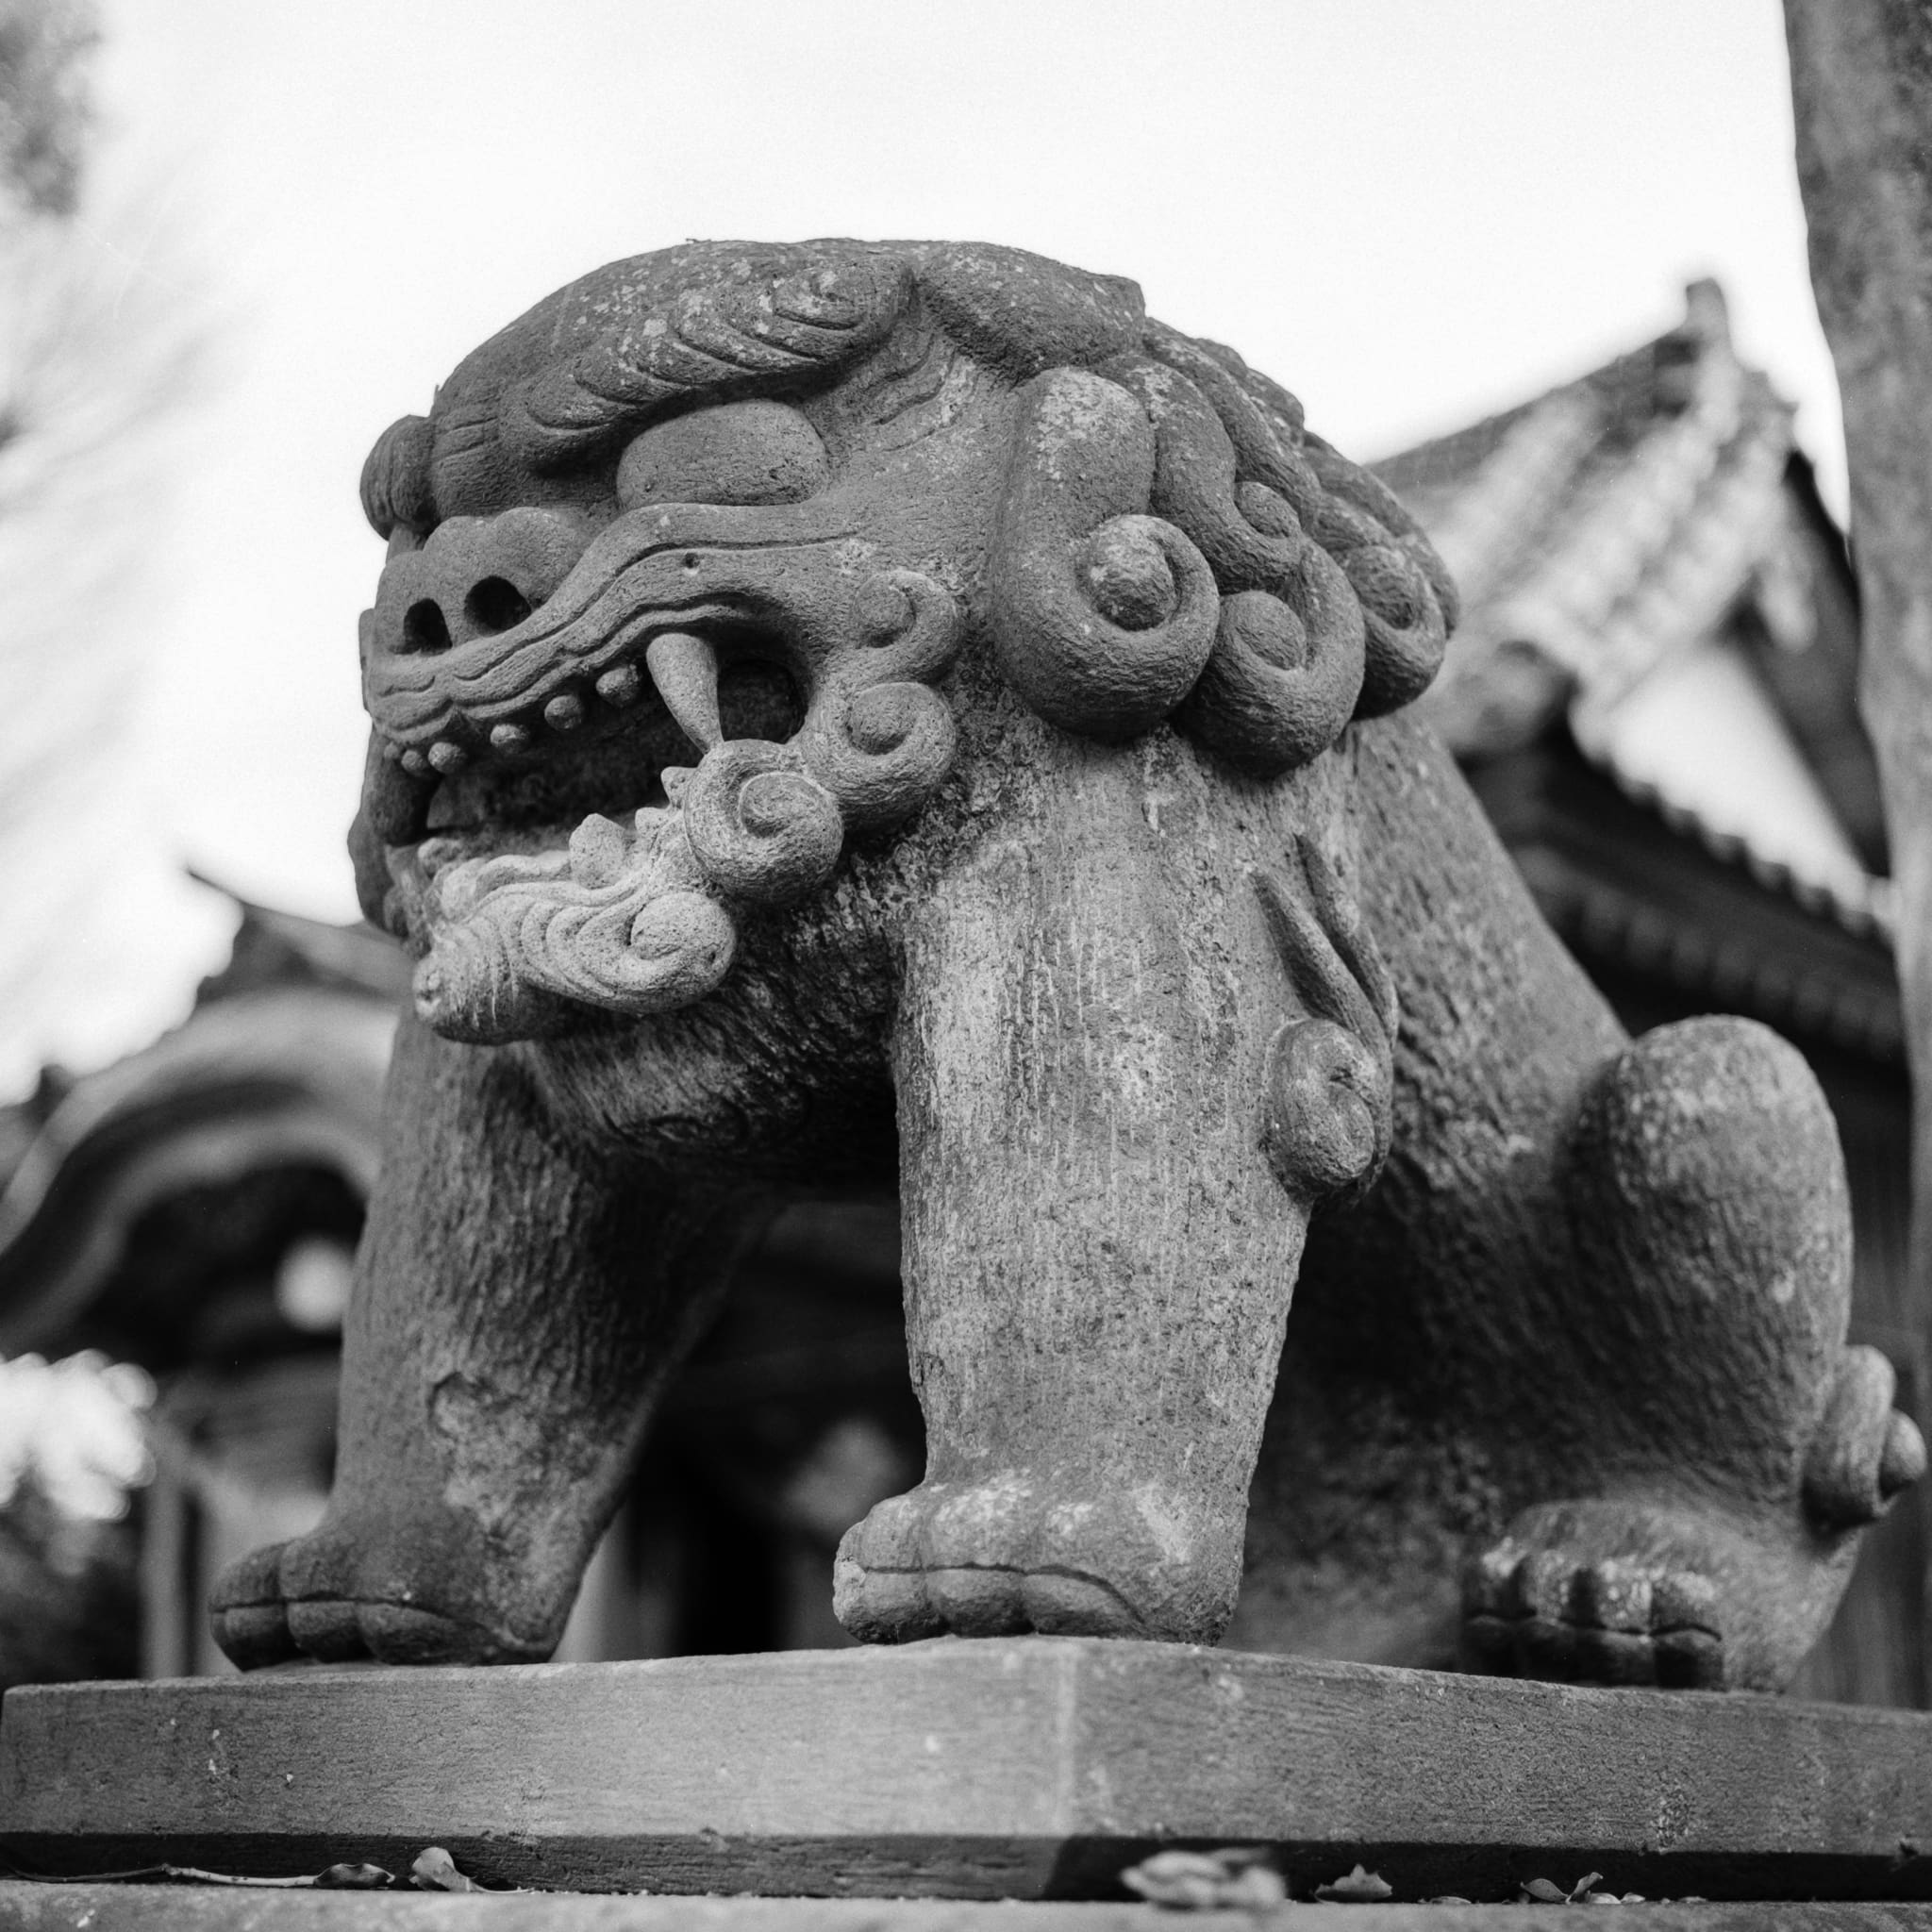 Ancient East Asian stone lion sculpture in black and white.